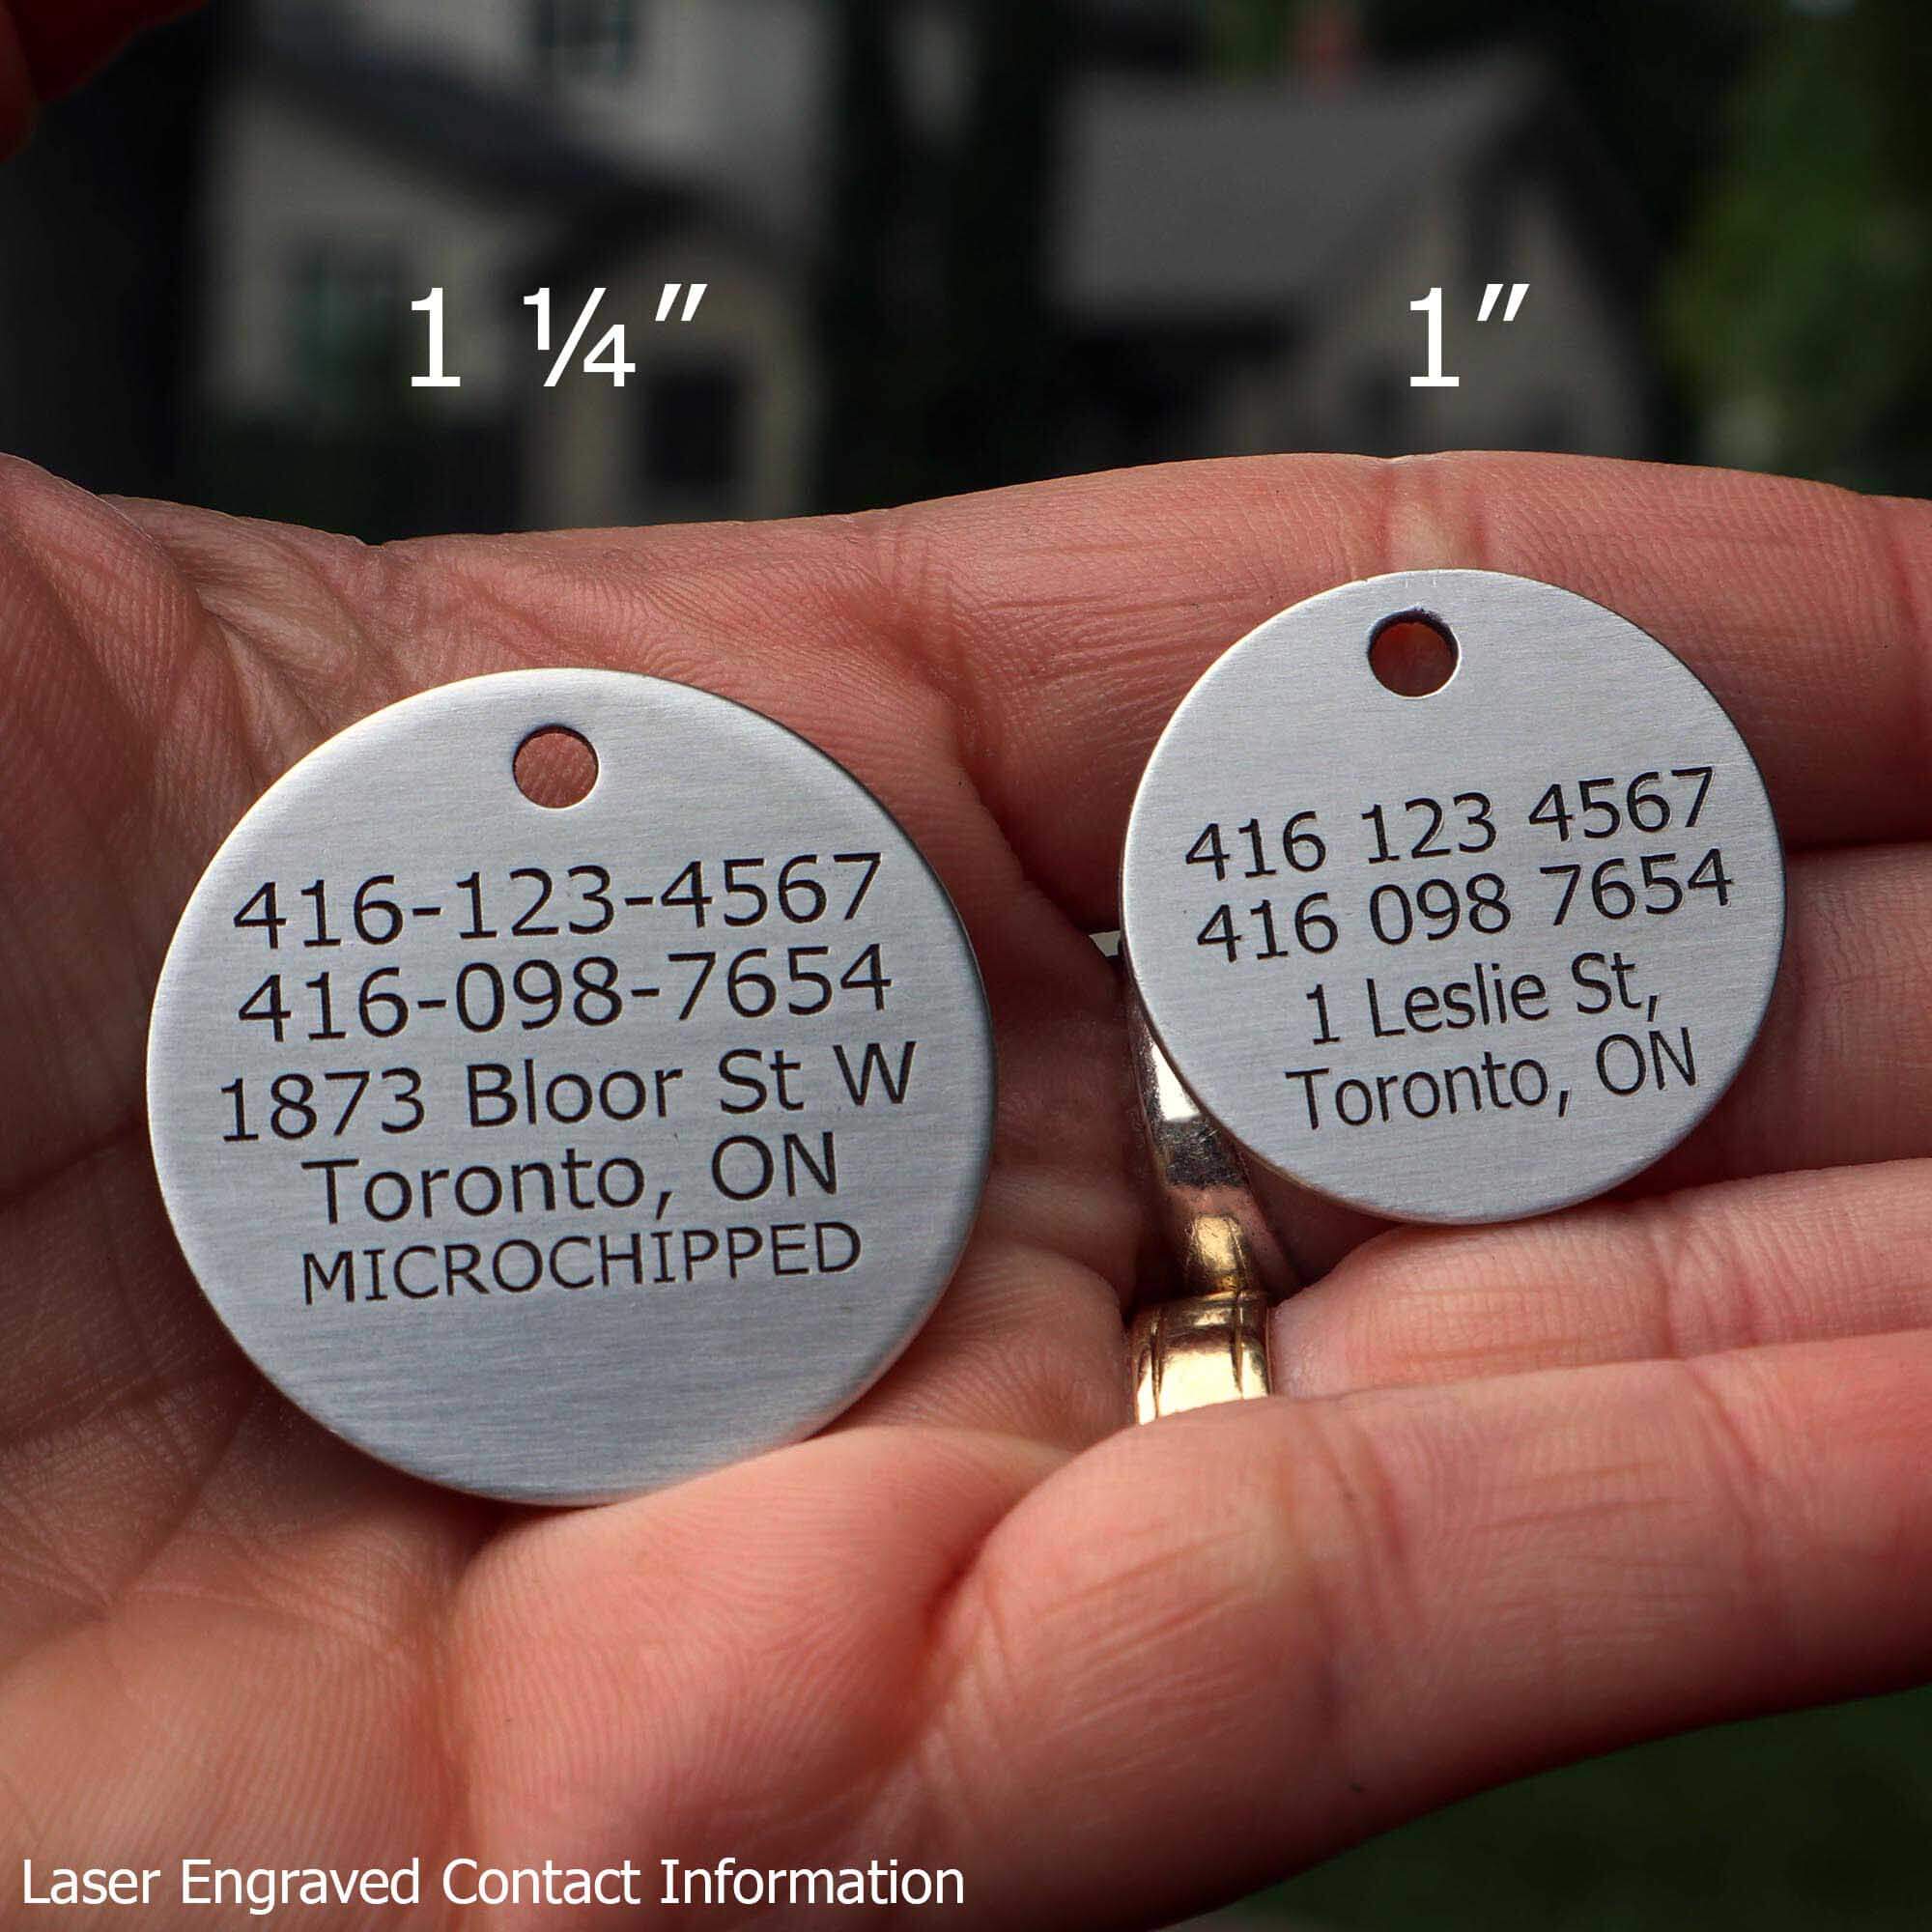 Laser Engraved Pet ID Tag Contact Information Example